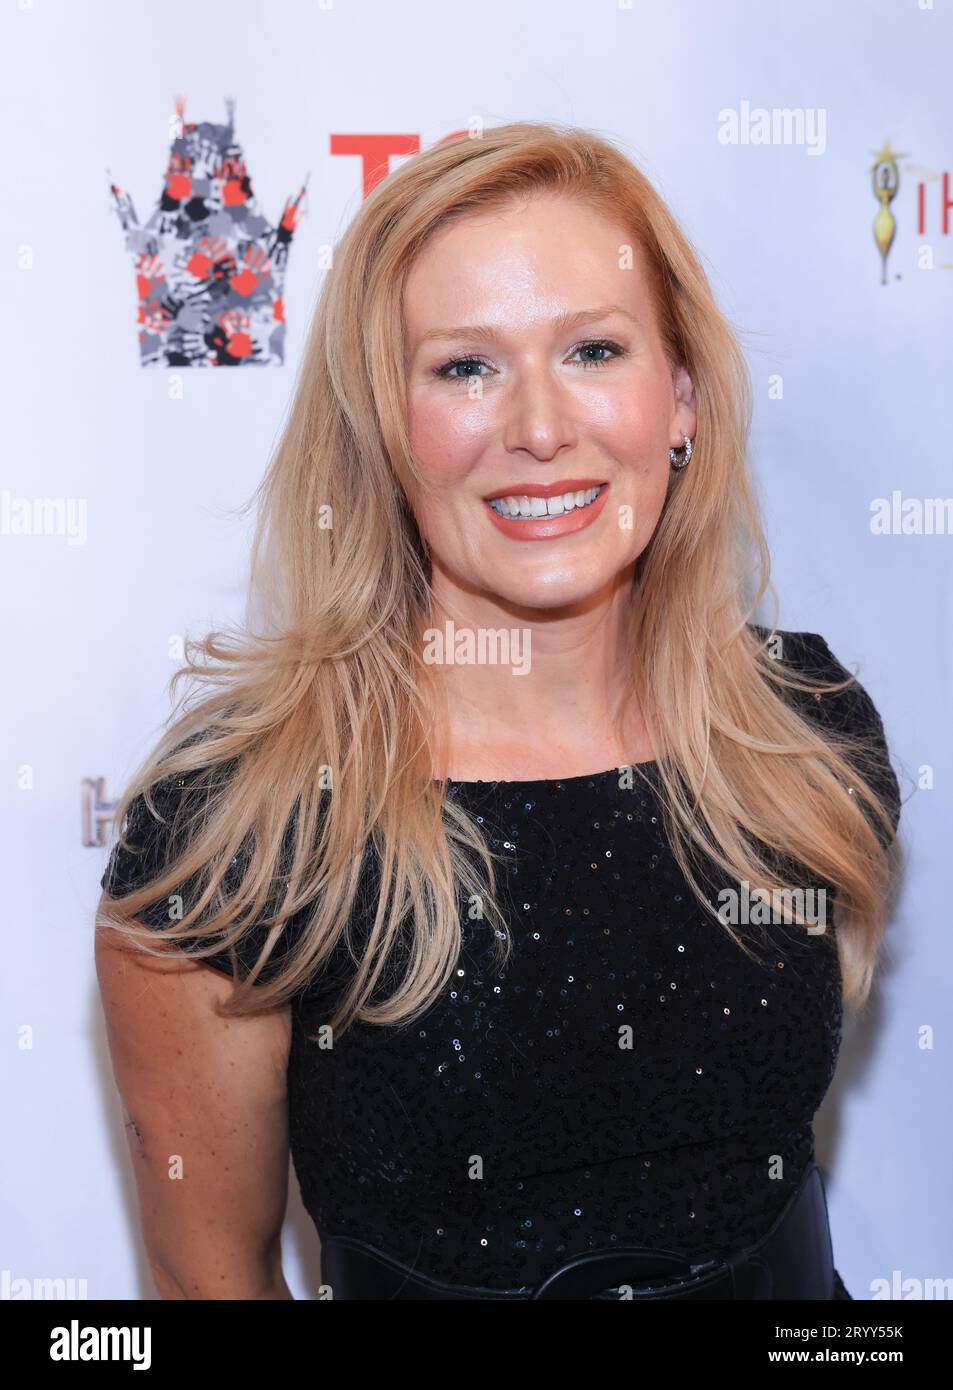 Hollywood, California, USA. 30th September 2023. Hillary Thomas attending the 3rd Annual iHollywood Film Fest at the TCL Chinese 6 Theatres in Hollywood, California. Credit: Sheri Determan Stock Photo